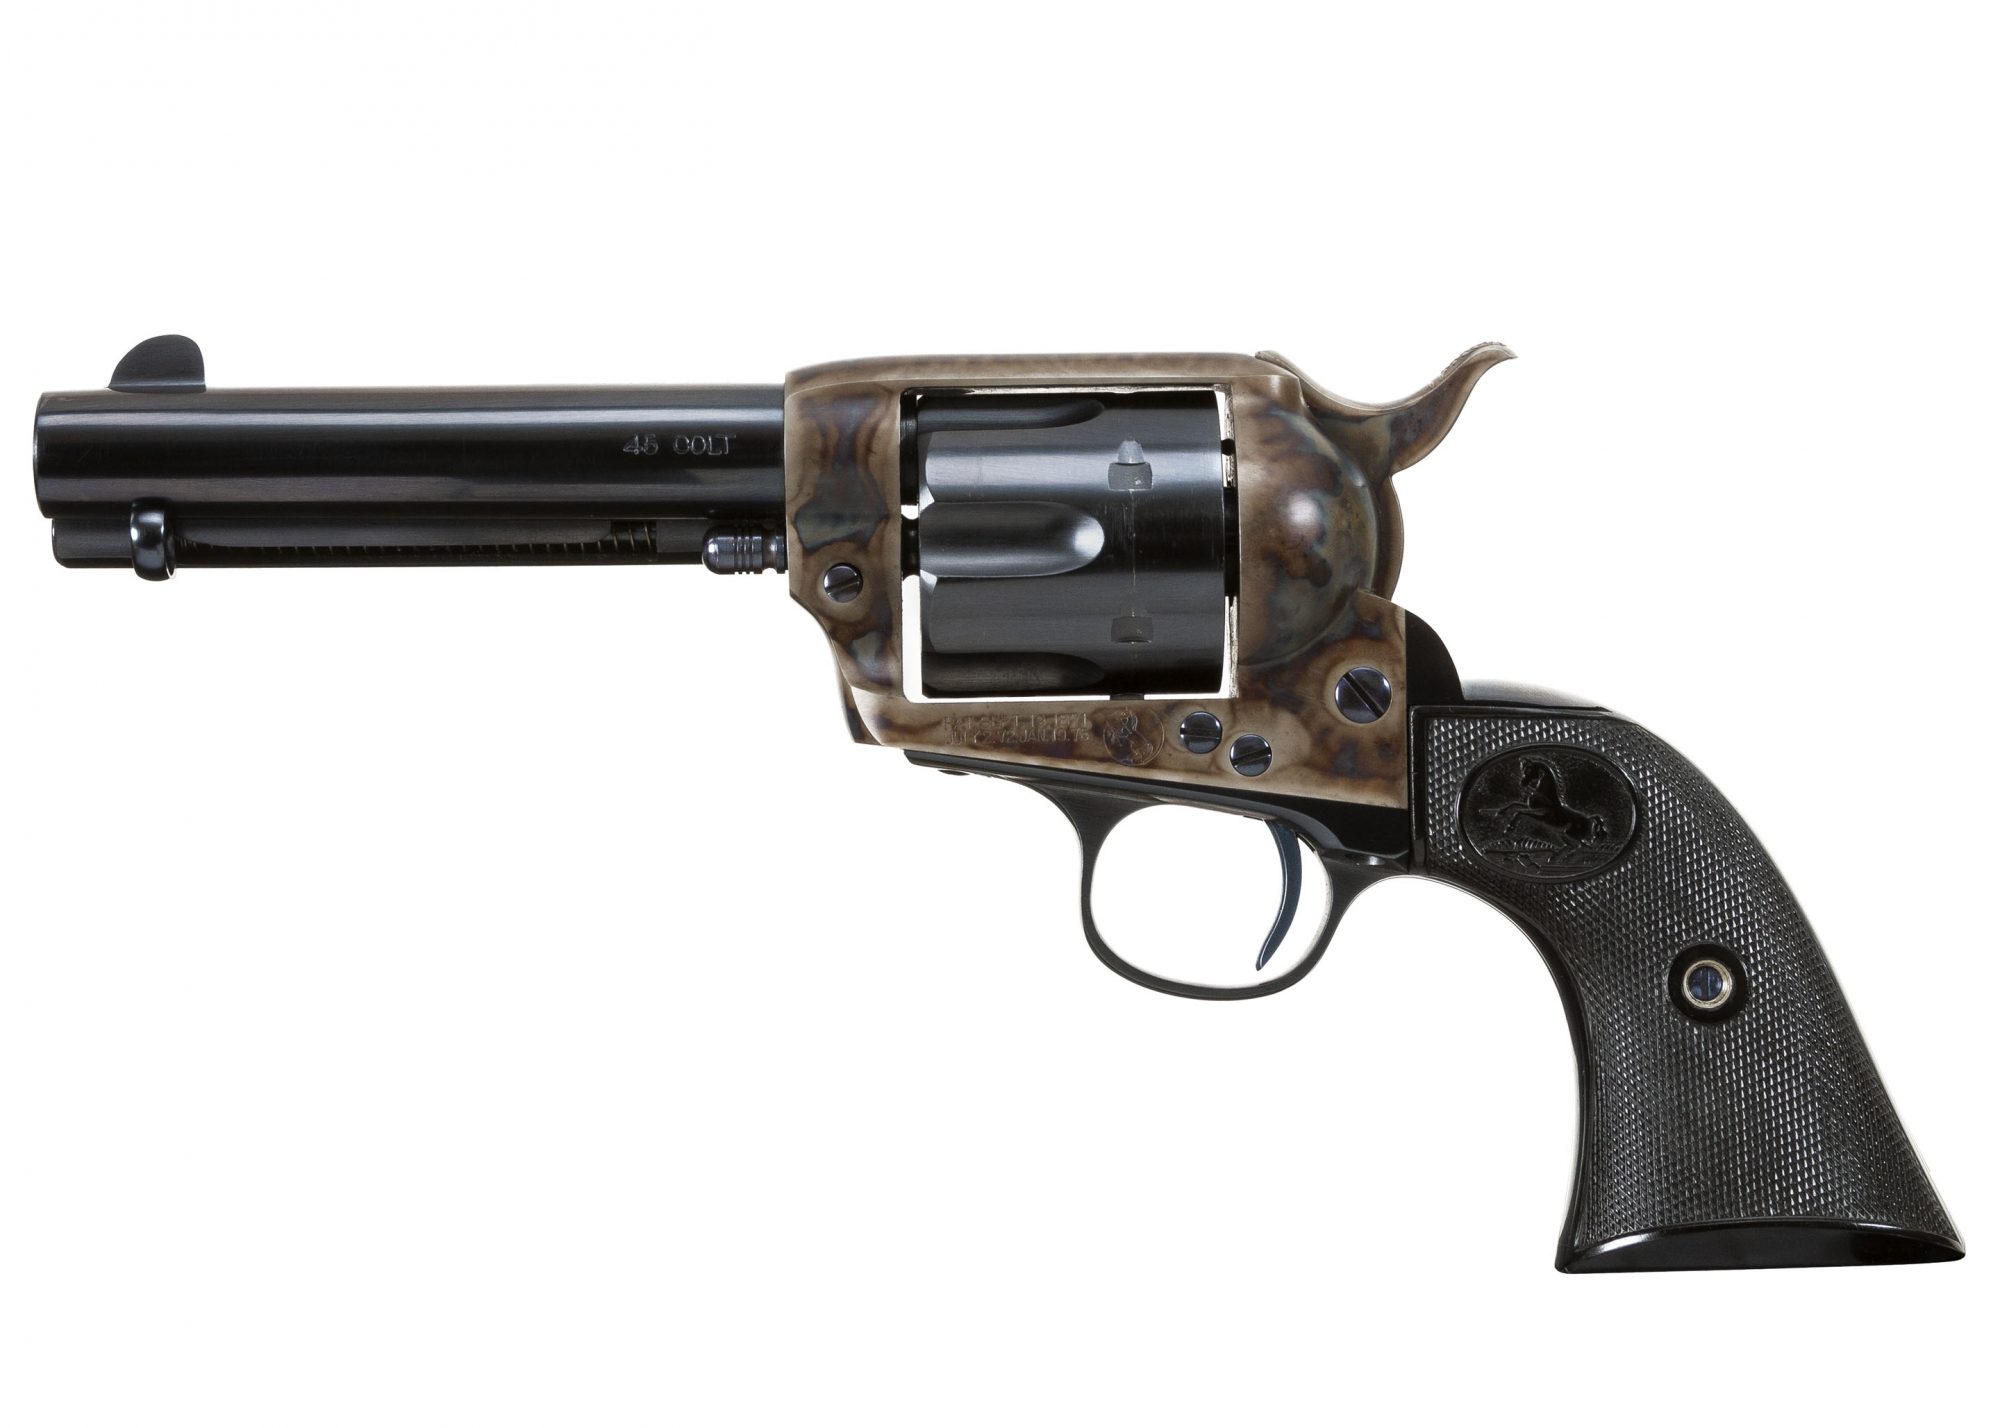 Photo of a Colt Single Action Army Revolver from 1899, restored by Turnbull Restoration Co. in 2000